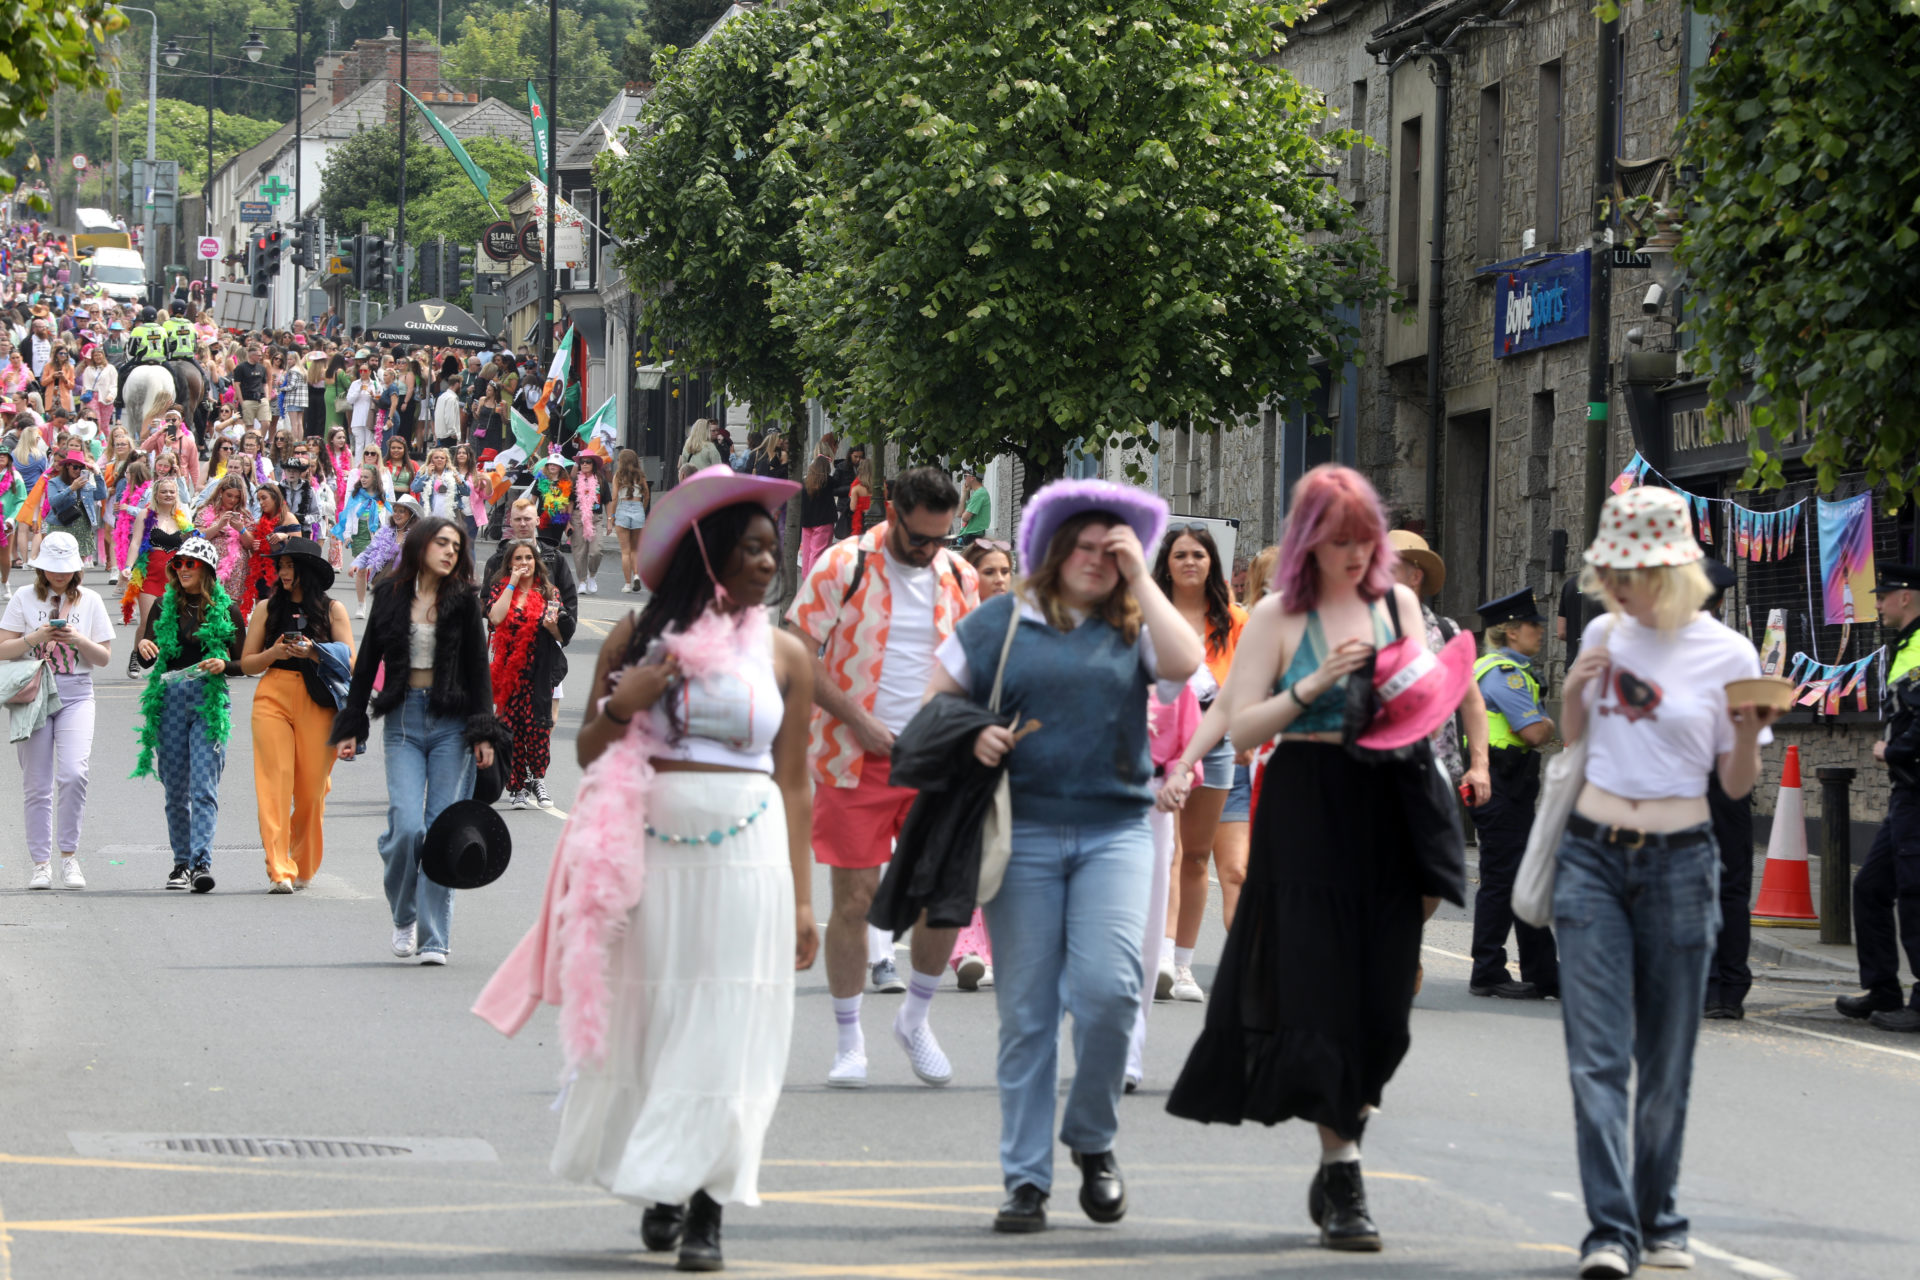 Dublin Ireland. Fans make their way to the Harry Styles concert in Slane